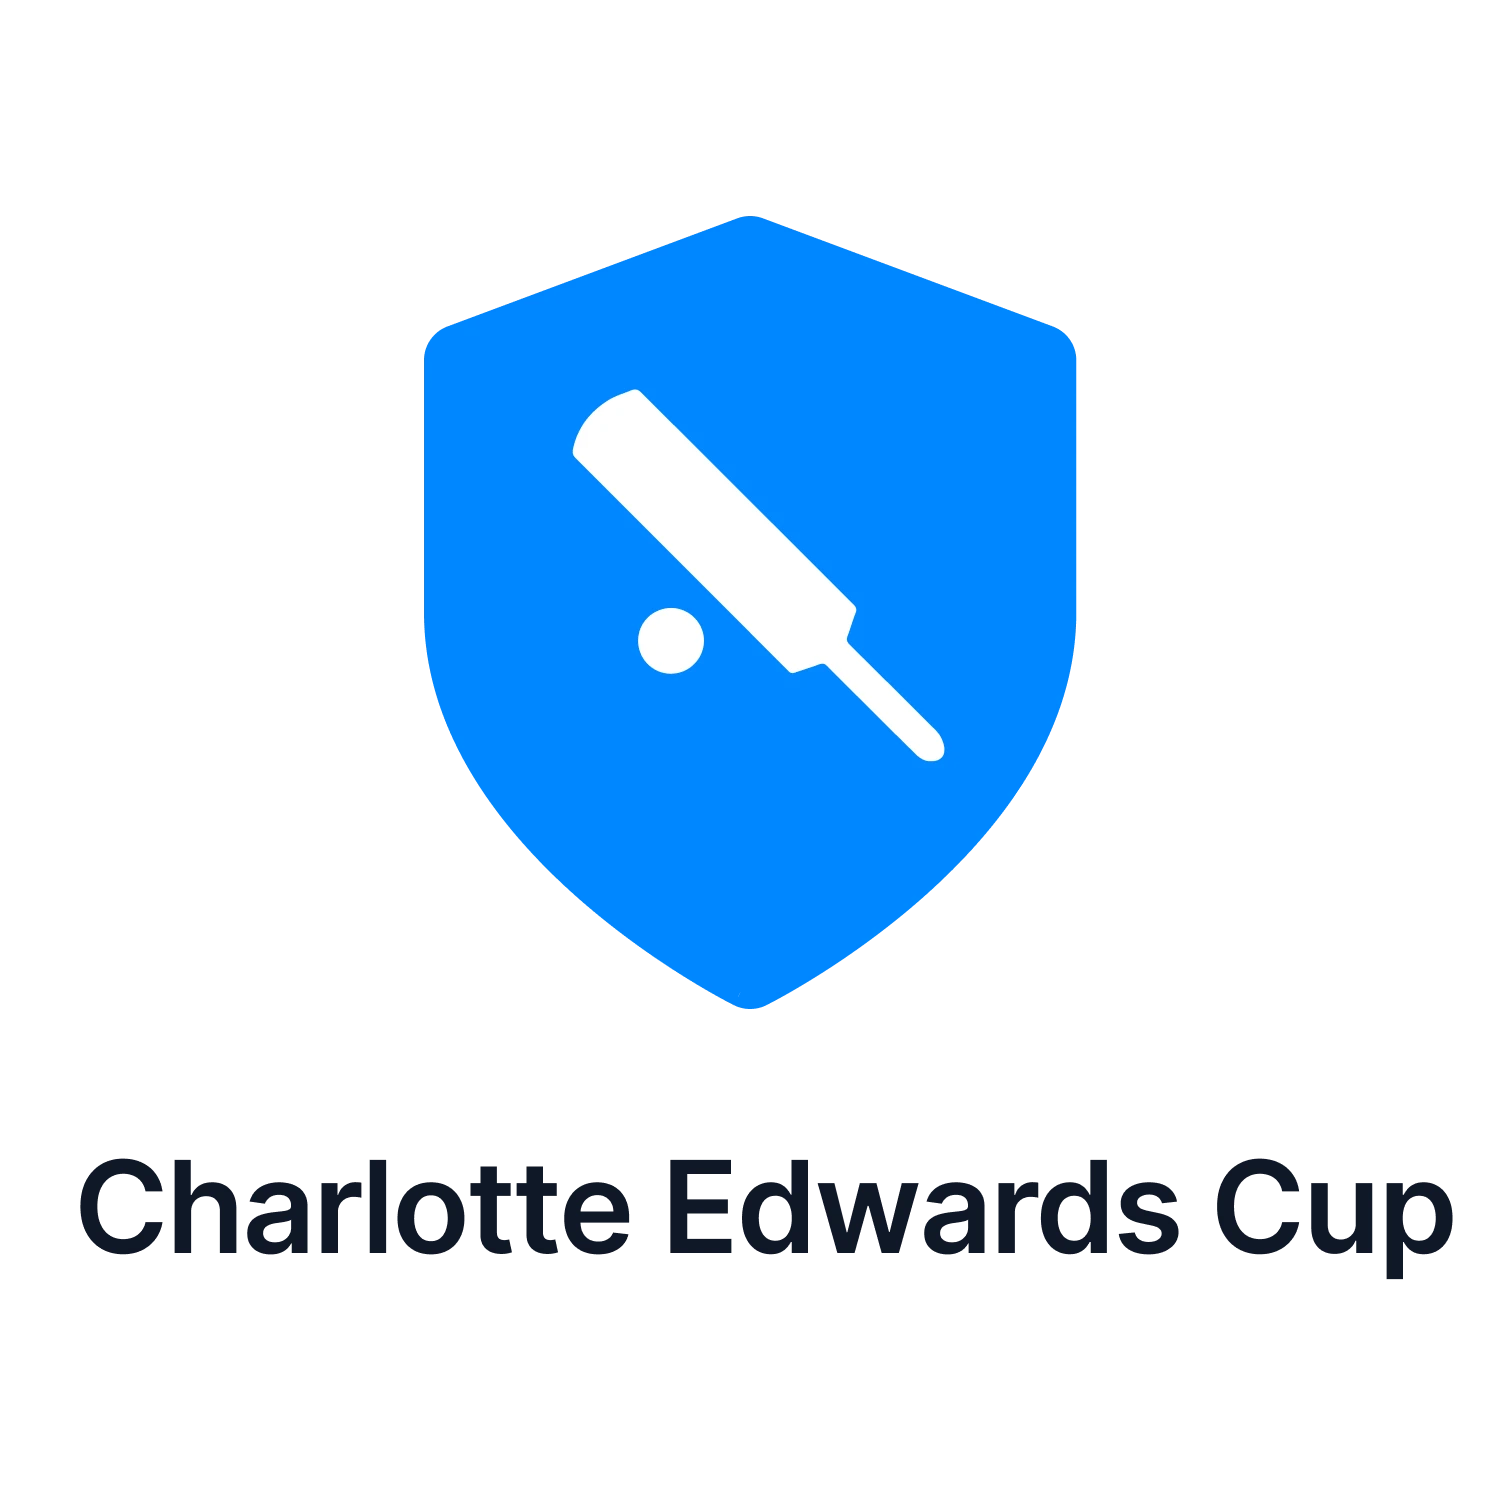 Check Charlotte Edwards Cup Match Predictions.